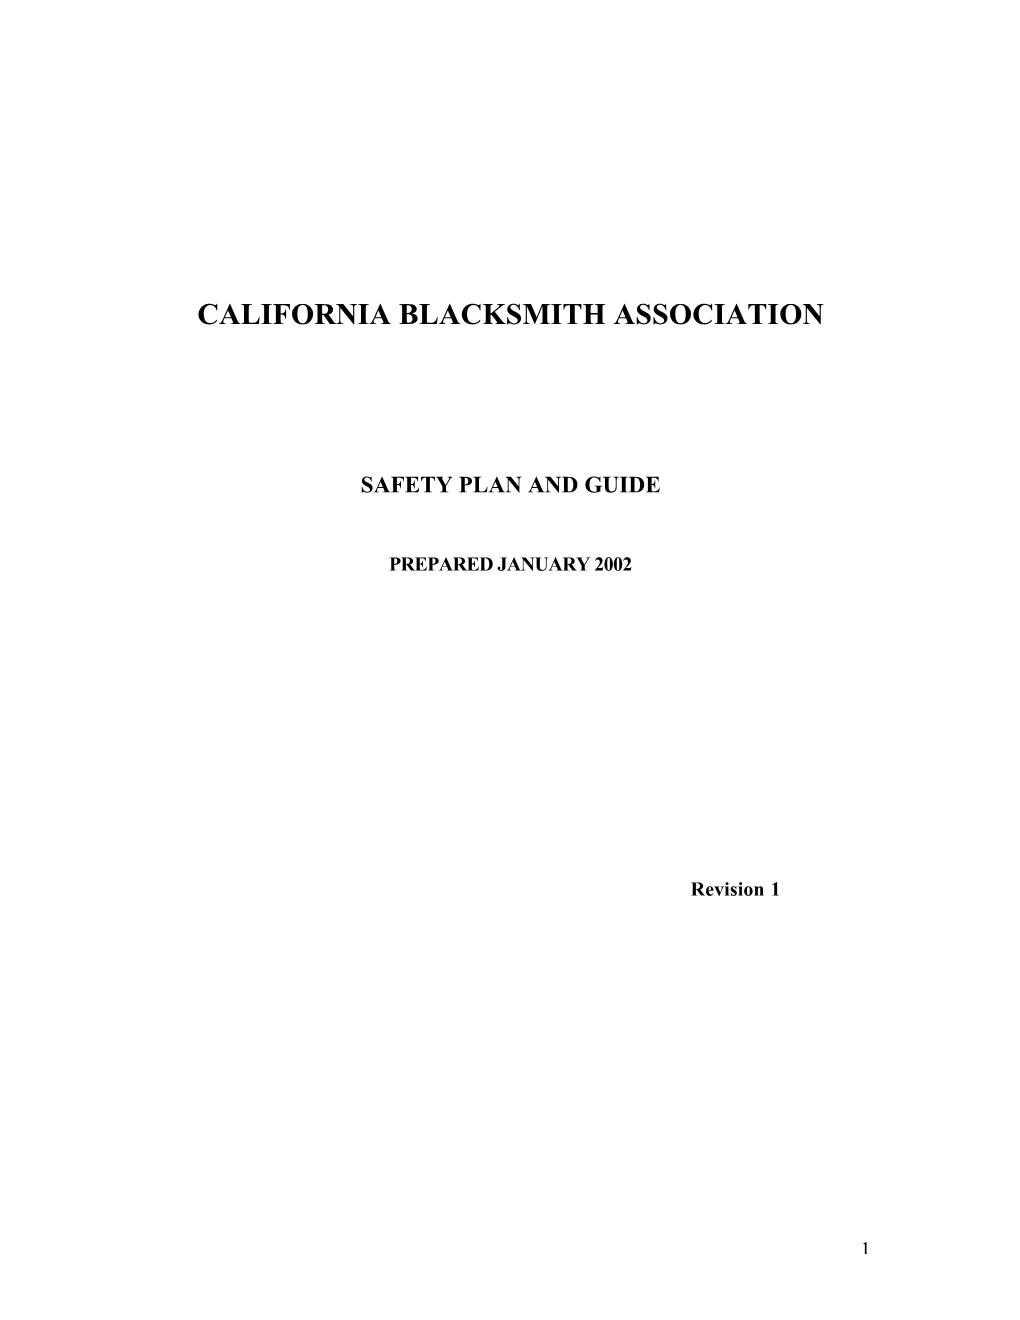 Safety Plan and Guide